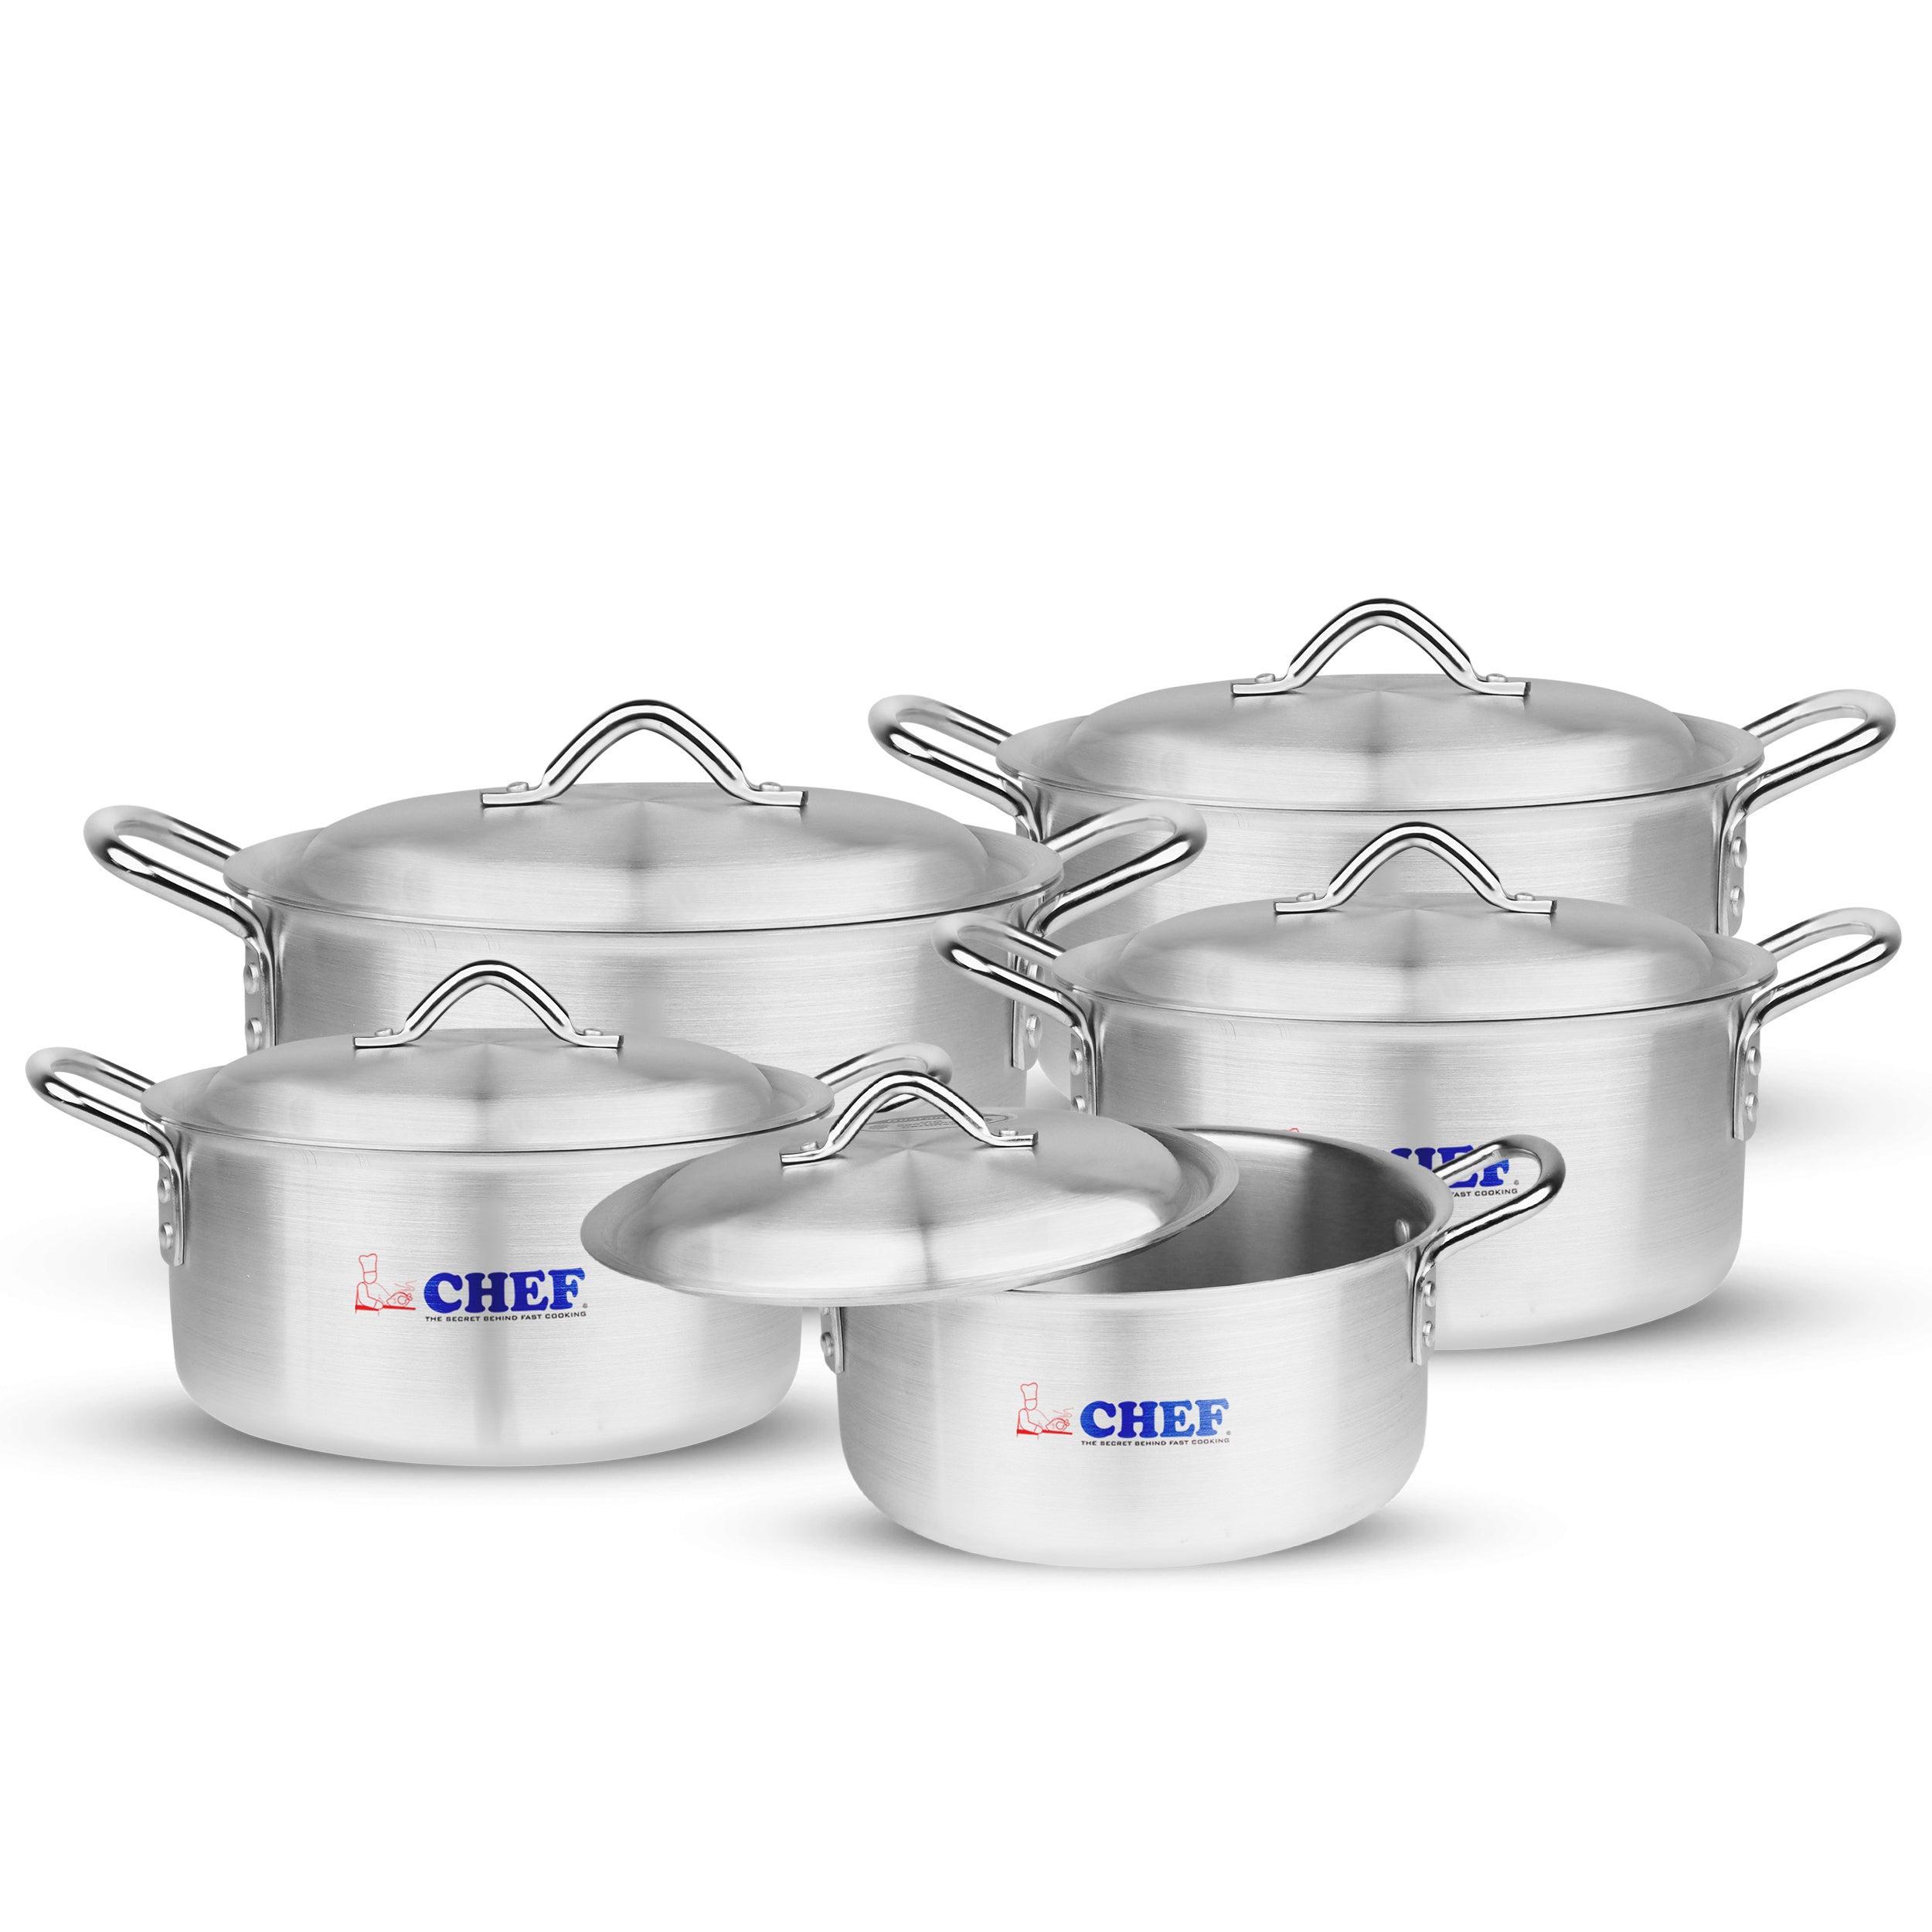 majestic chef best cookware brand in Pakistan 5 pcs metal finish silver cooking pots at low price 